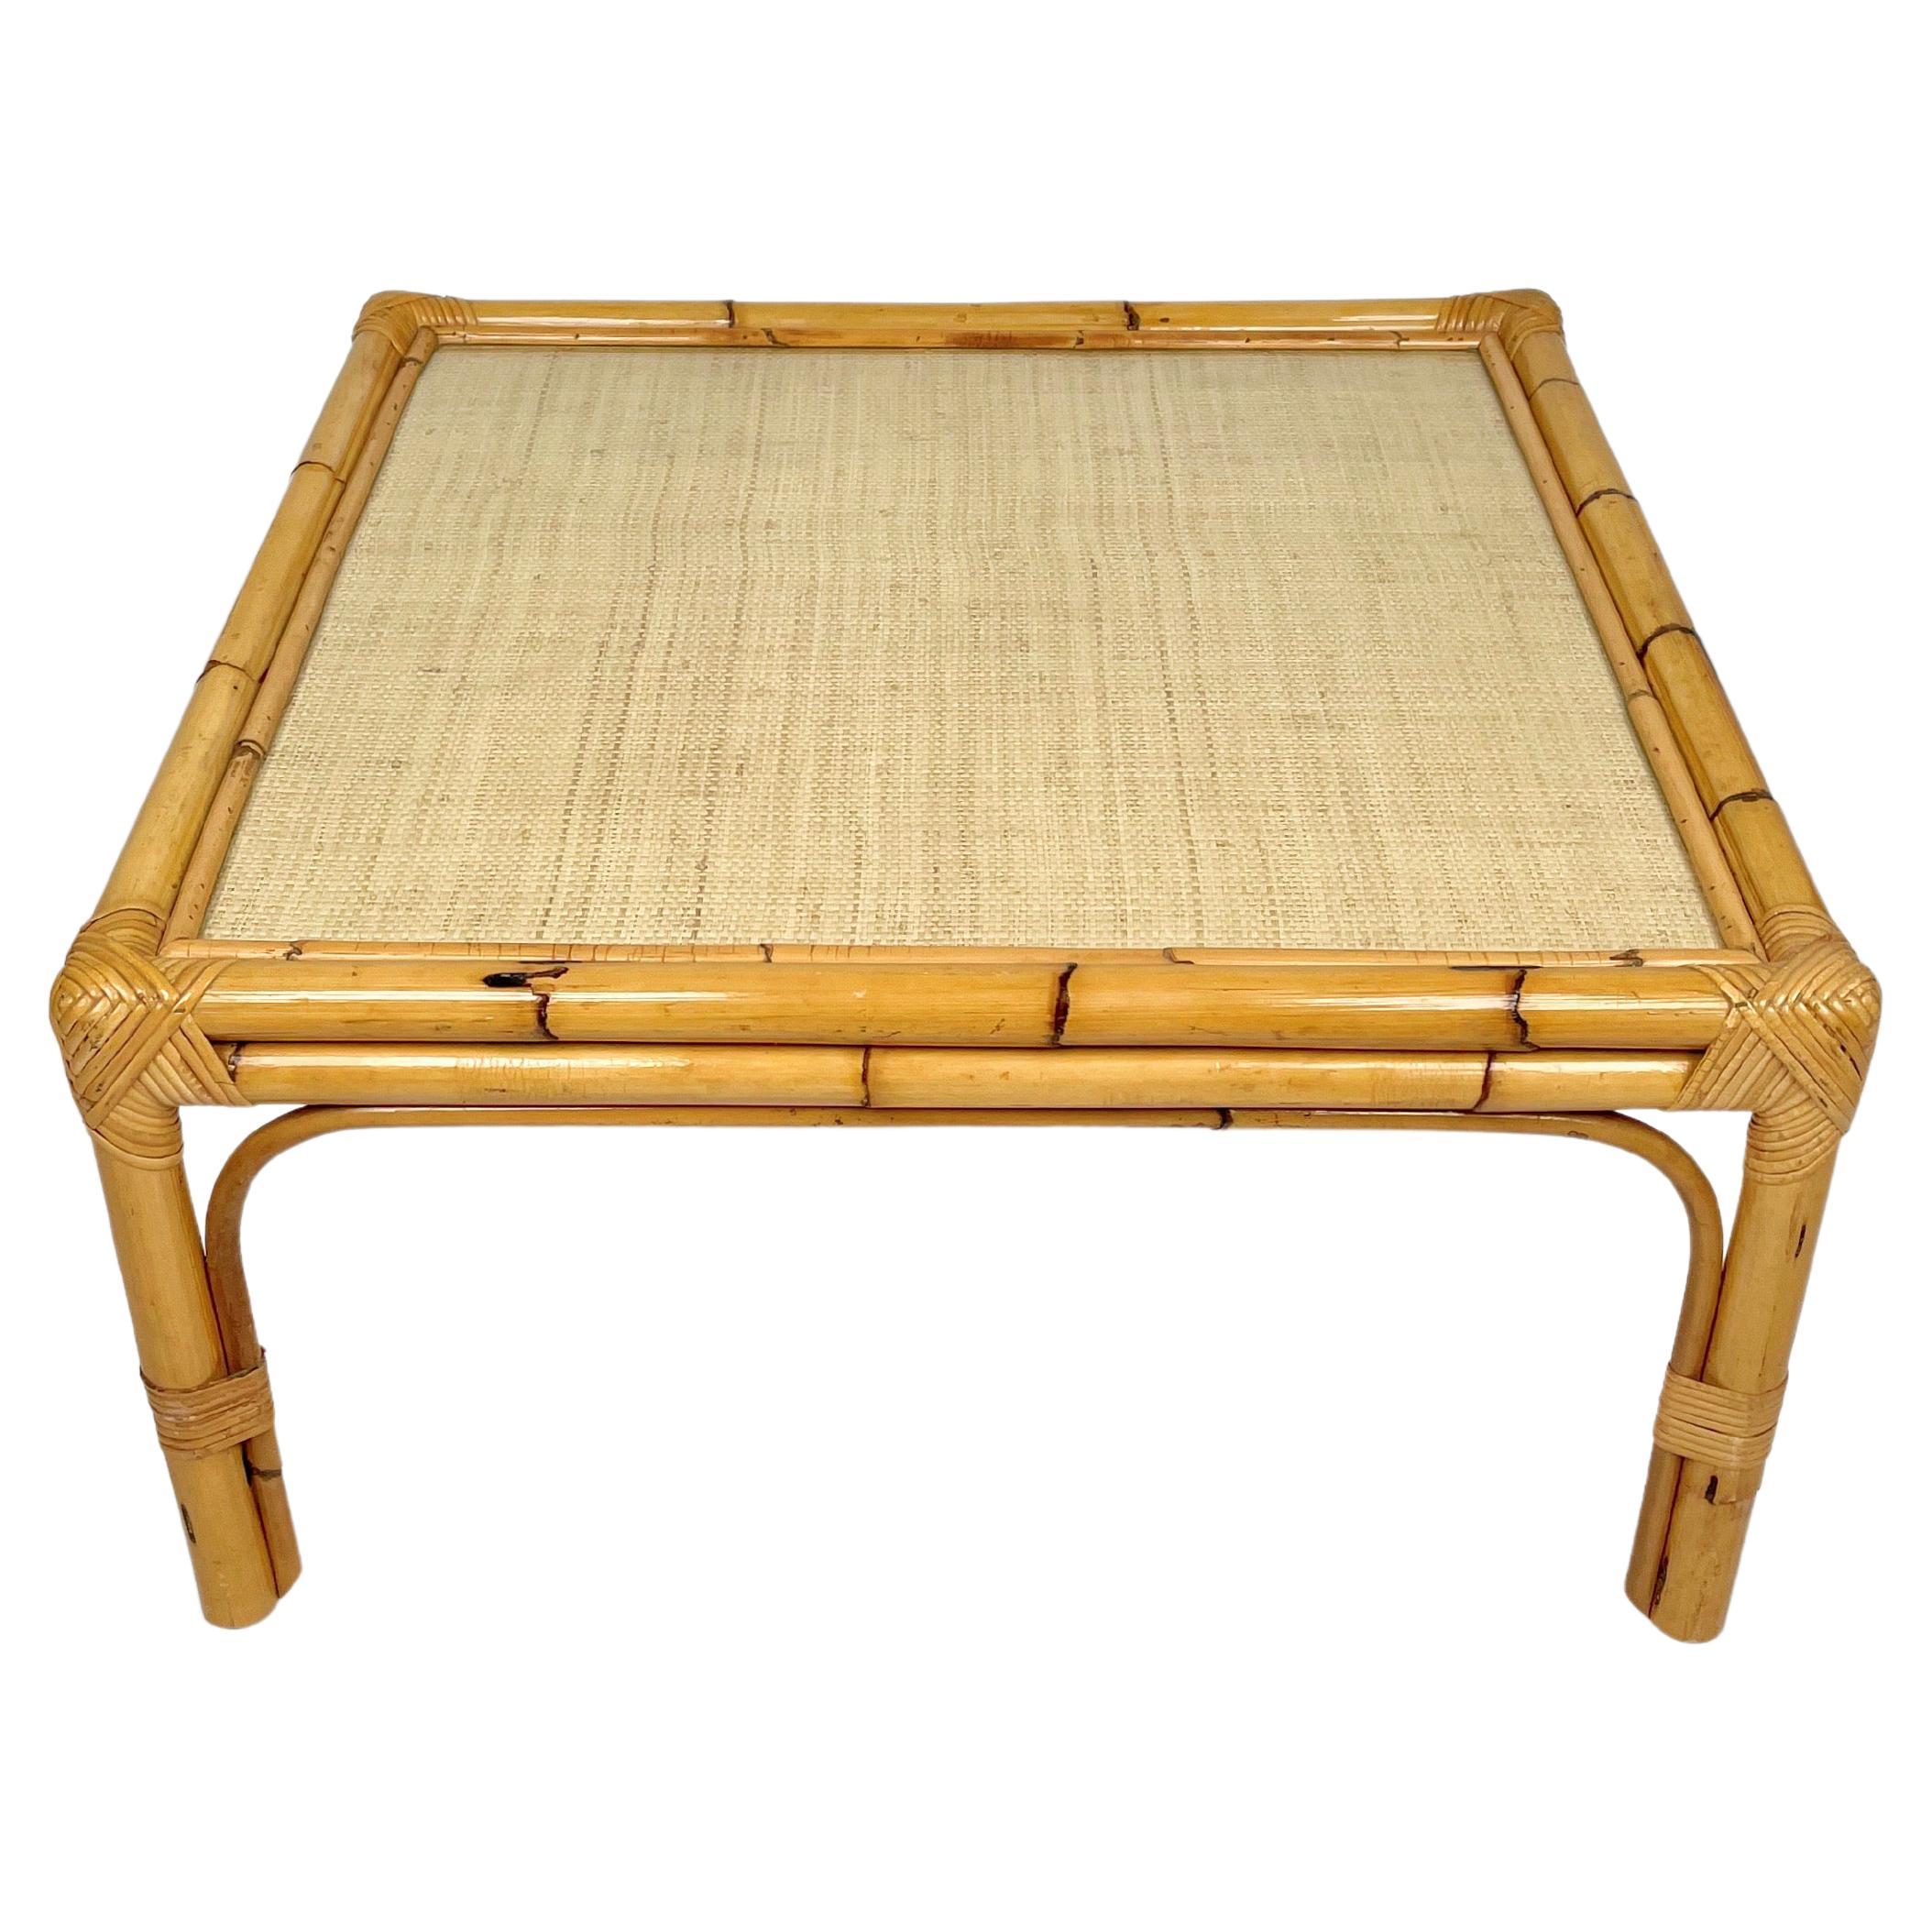 Bamboo, Rattan & Wicker Squared Coffee Table, Italy, 1960s For Sale